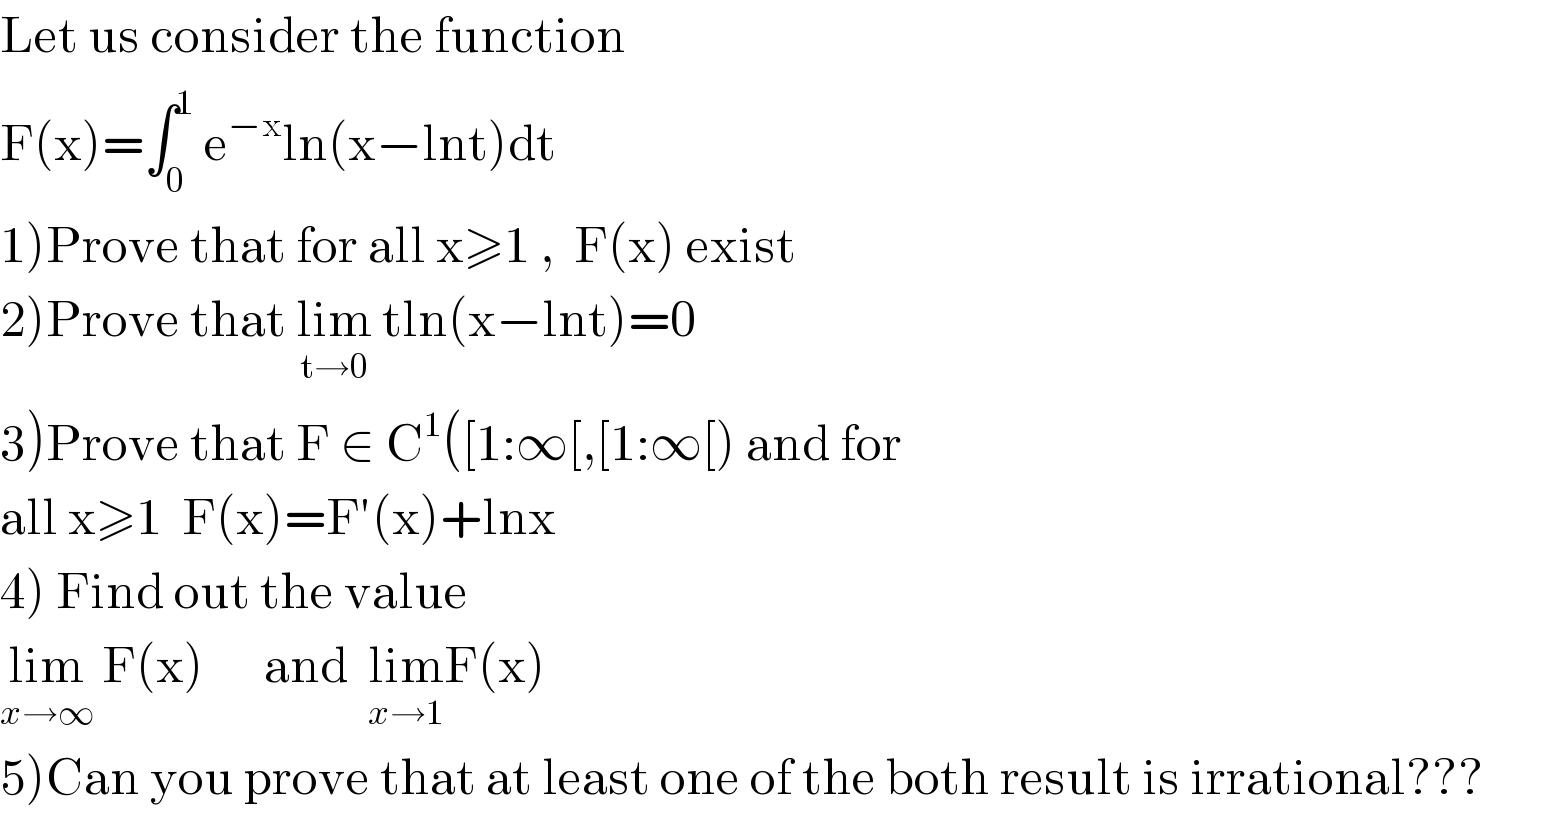 Let us consider the function   F(x)=∫_0 ^1  e^(−x) ln(x−lnt)dt   1)Prove that for all x≥1 ,  F(x) exist  2)Prove that lim_(t→0)  tln(x−lnt)=0  3)Prove that F ∈ C^1 ([1:∞[,[1:∞[) and for   all x≥1  F(x)=F′(x)+lnx  4) Find out the value   lim_(x→∞)  F(x)      and  lim_(x→1) F(x)  5)Can you prove that at least one of the both result is irrational???  